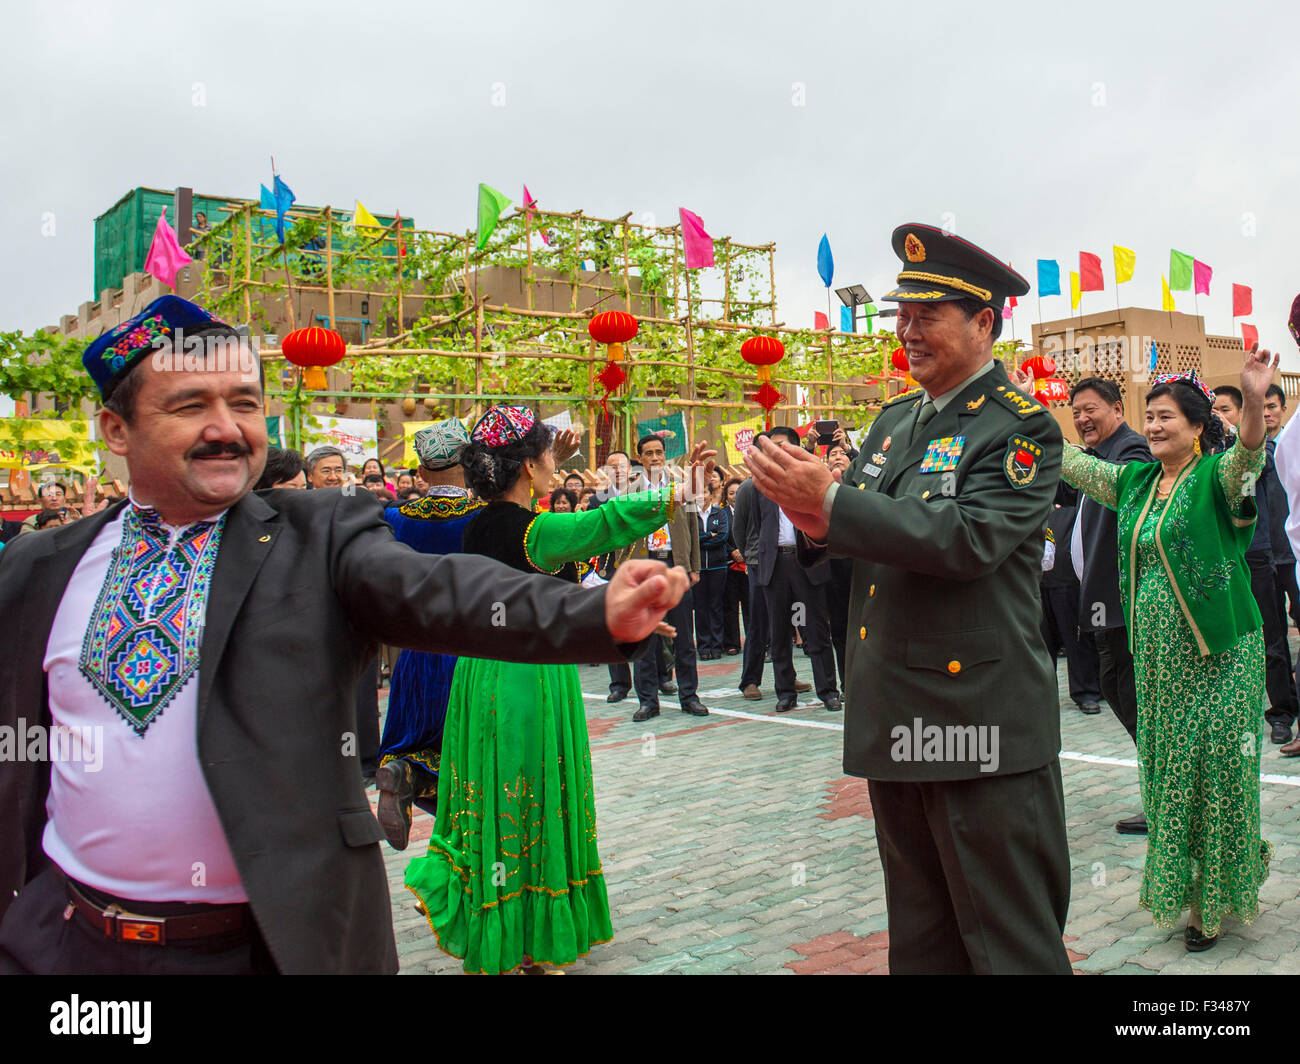 Turpan, China's Xinjiang Uygur Autonomous Region. 29th Sep, 2015. Zhao Keshi (R, front), head of PLA's General Logistics Department, visits local residents in Gaochang District of Turpan, northwest China's Xinjiang Uygur Autonomous Region, Sept. 29, 2015. © Jiang Wenyao/Xinhua/Alamy Live News Stock Photo